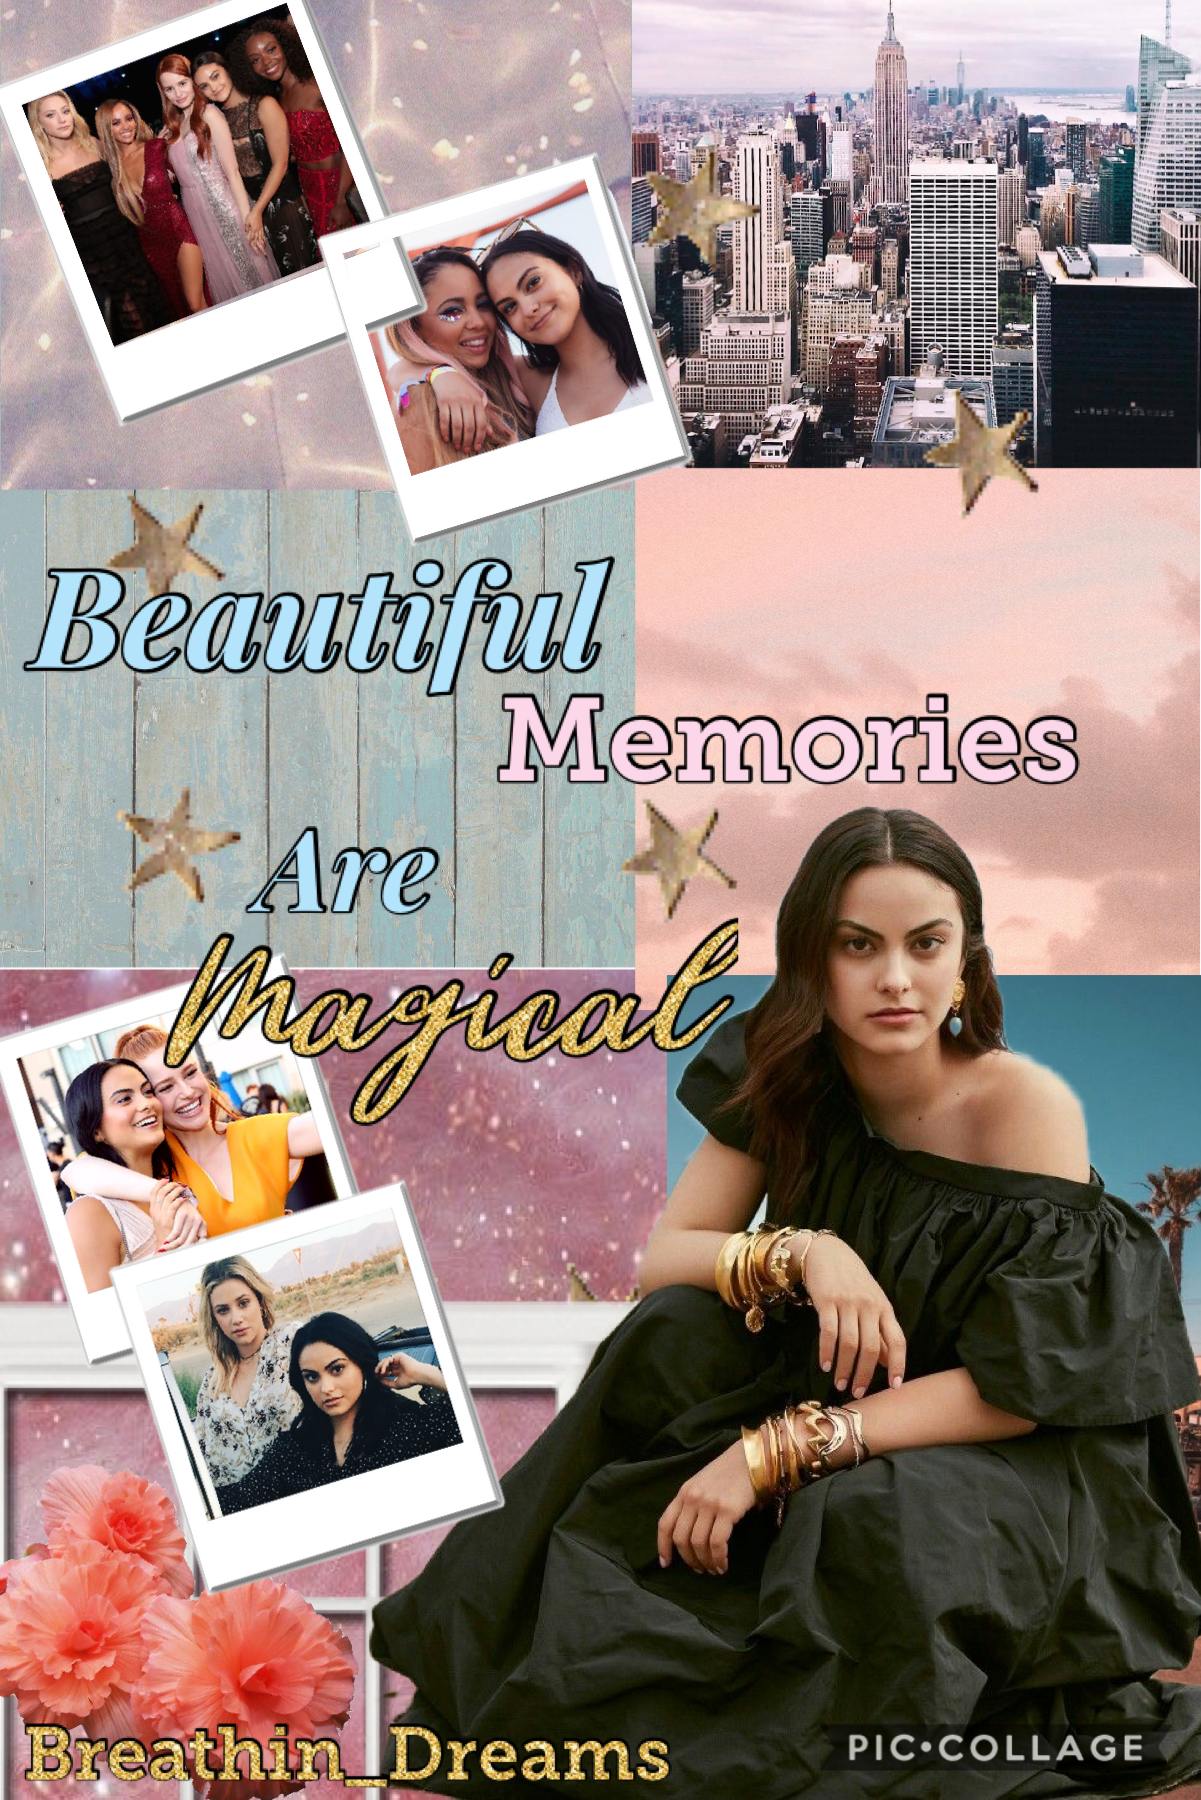 Camila Mendes collage 24.1.21